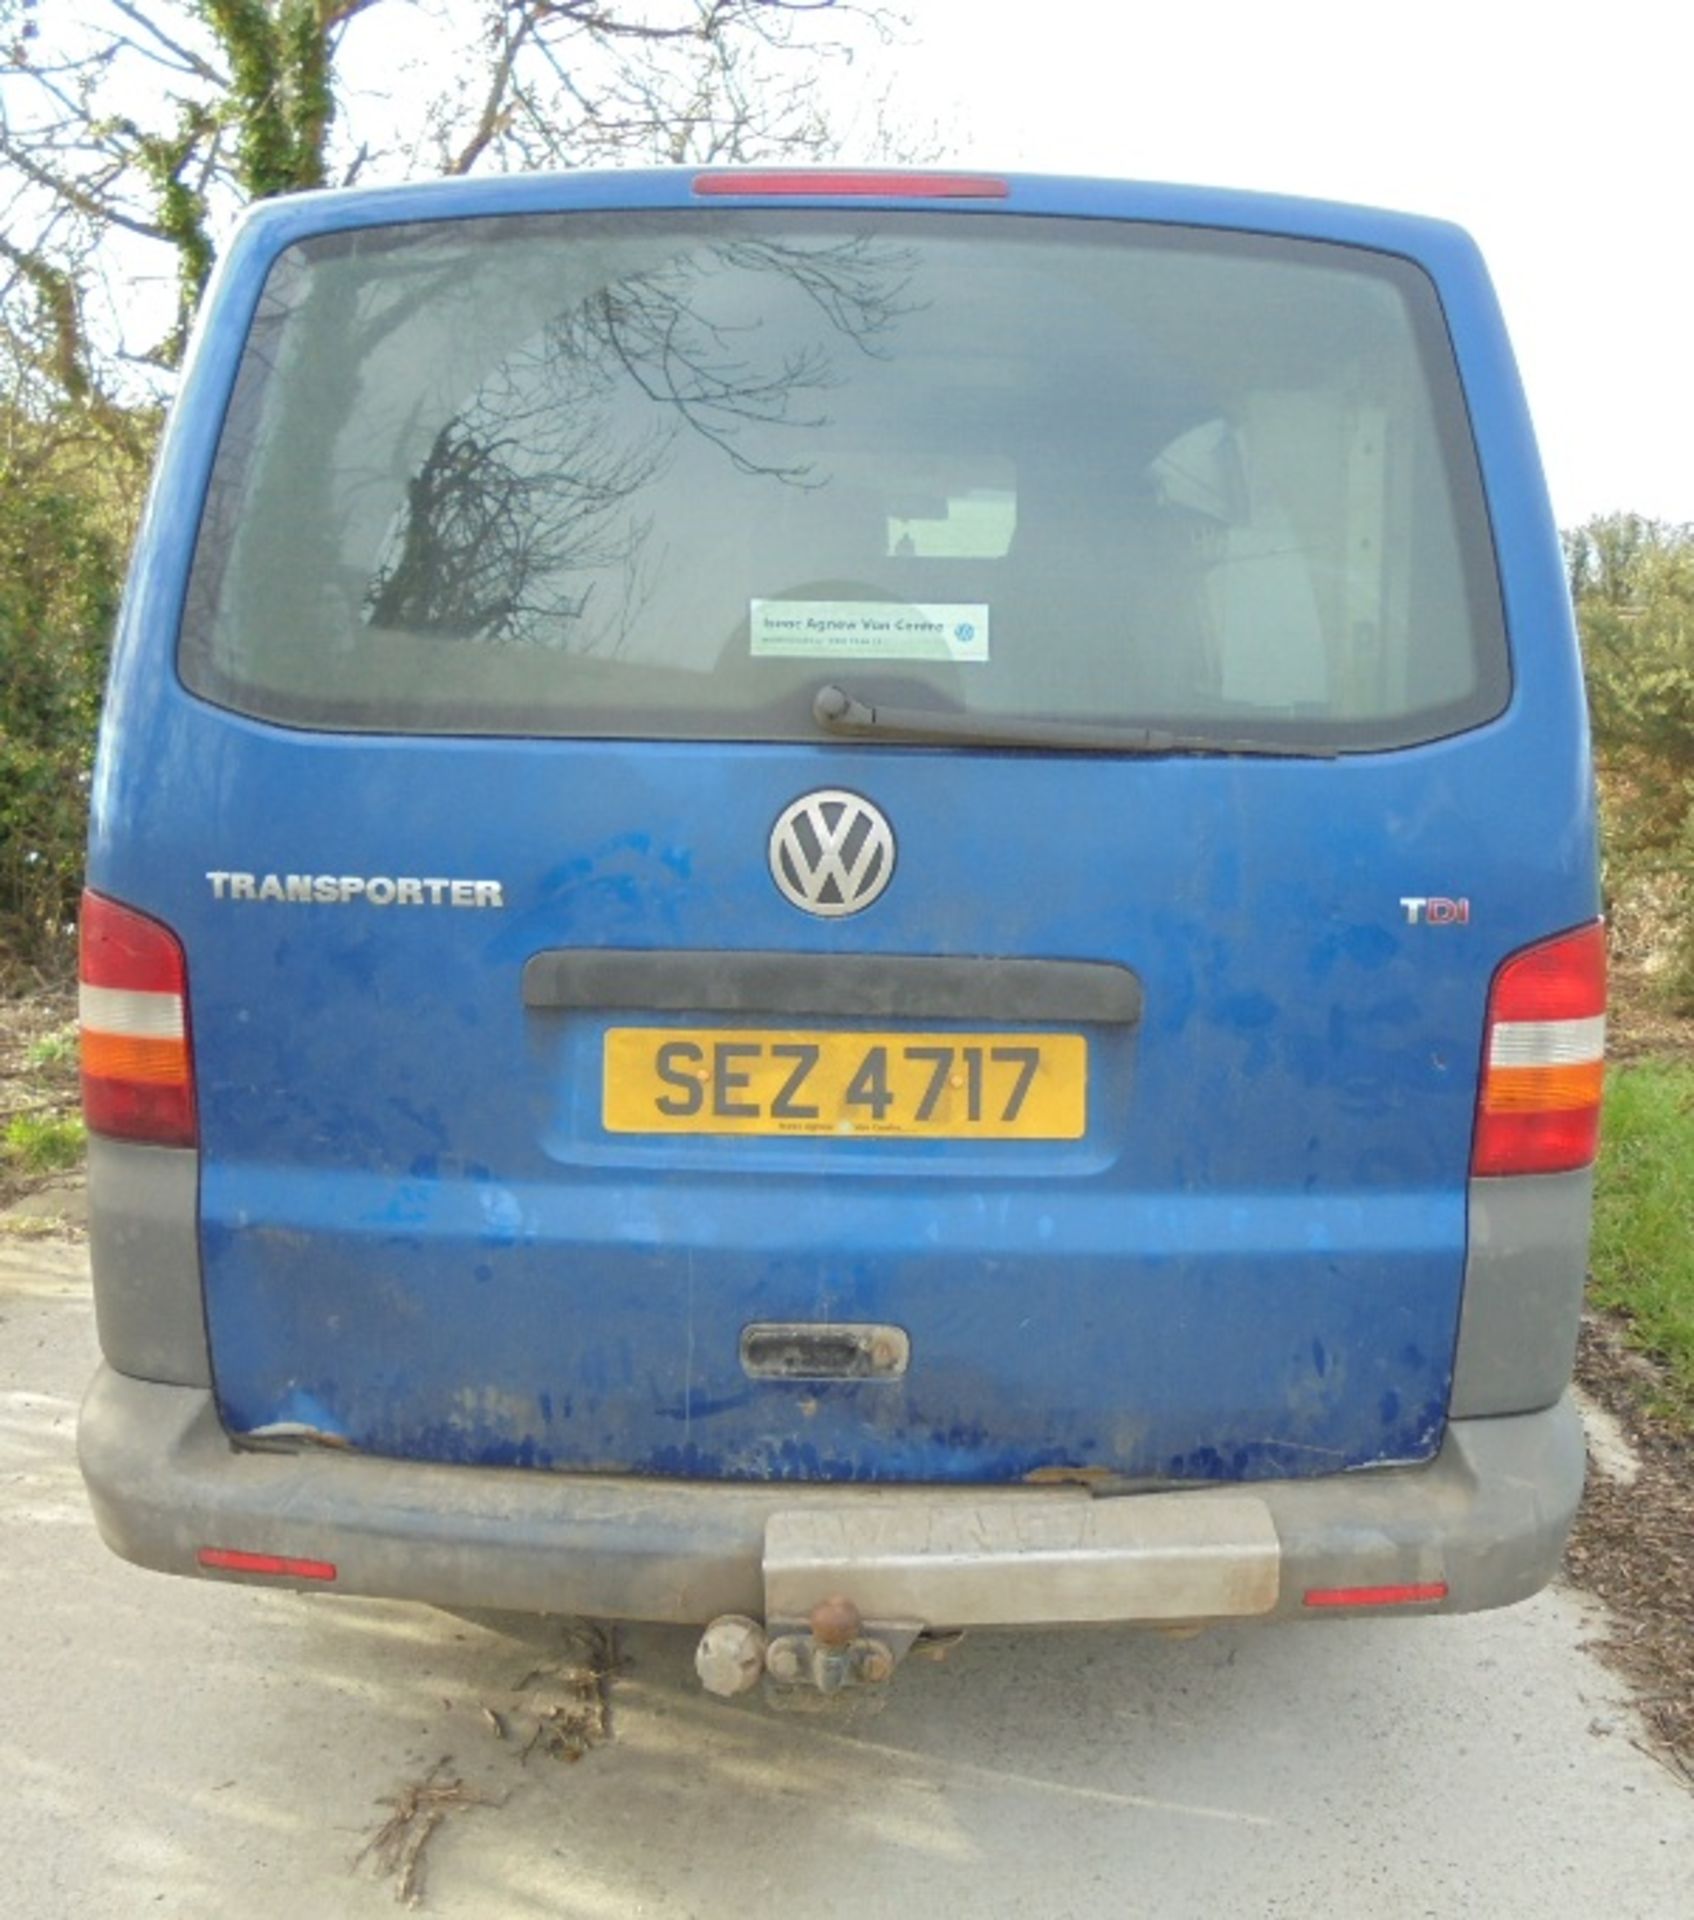 2008 Volkswagon Transporter, Automatic Gearbox, Side Loading Door, 123000 Miles Reg: SEZ 4717 - Image 5 of 9